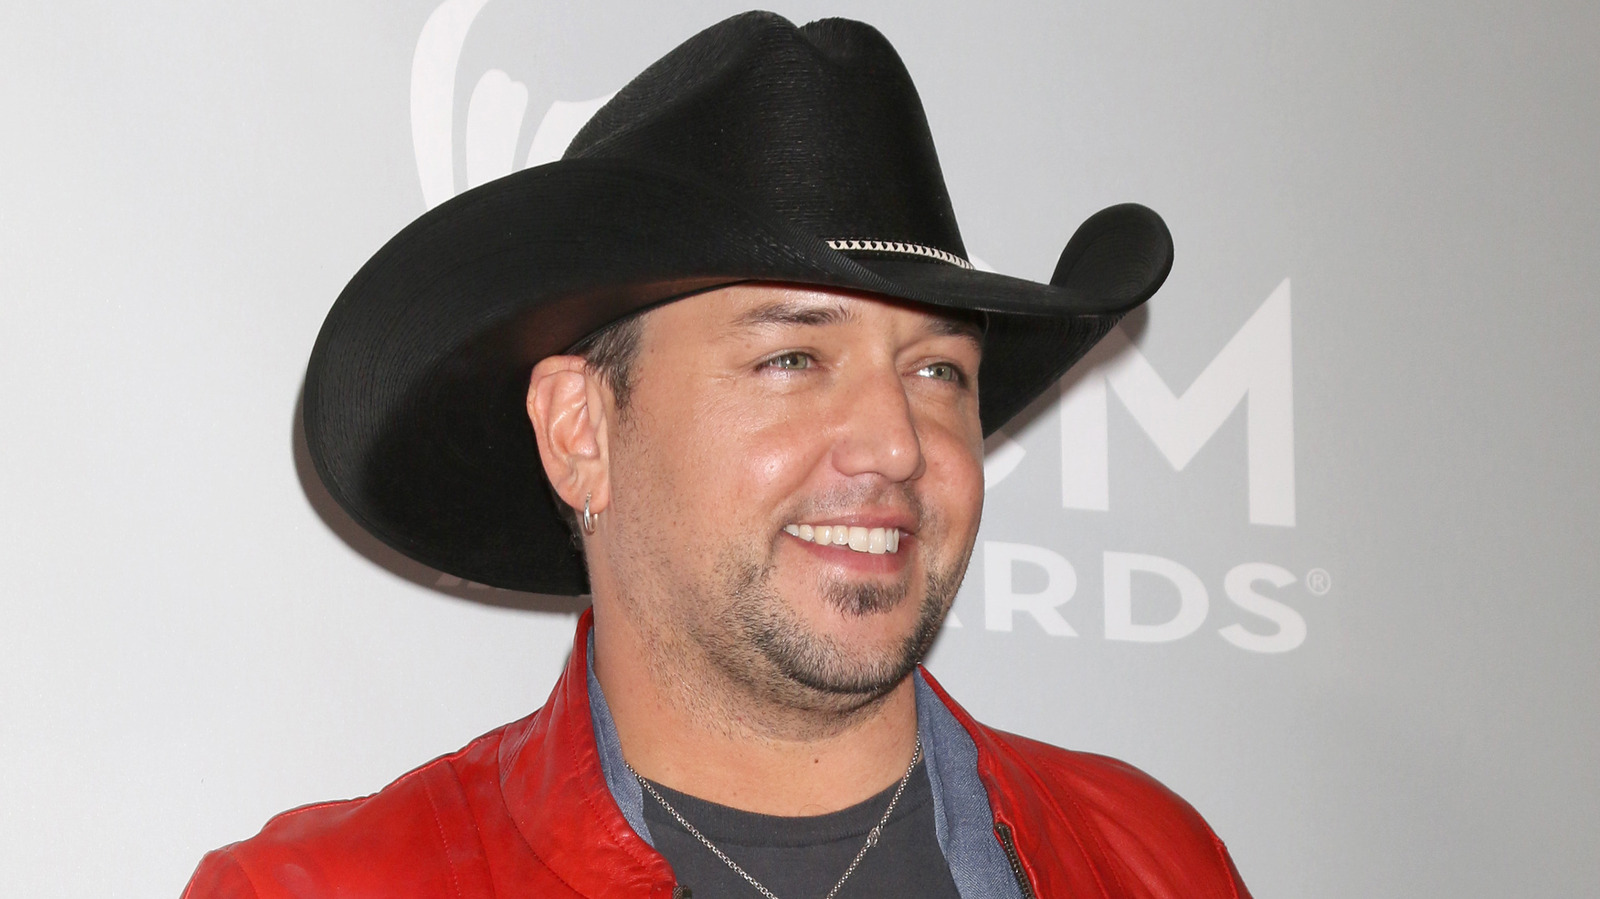 Why Jason Aldean's New Single Is Getting Major Pushback